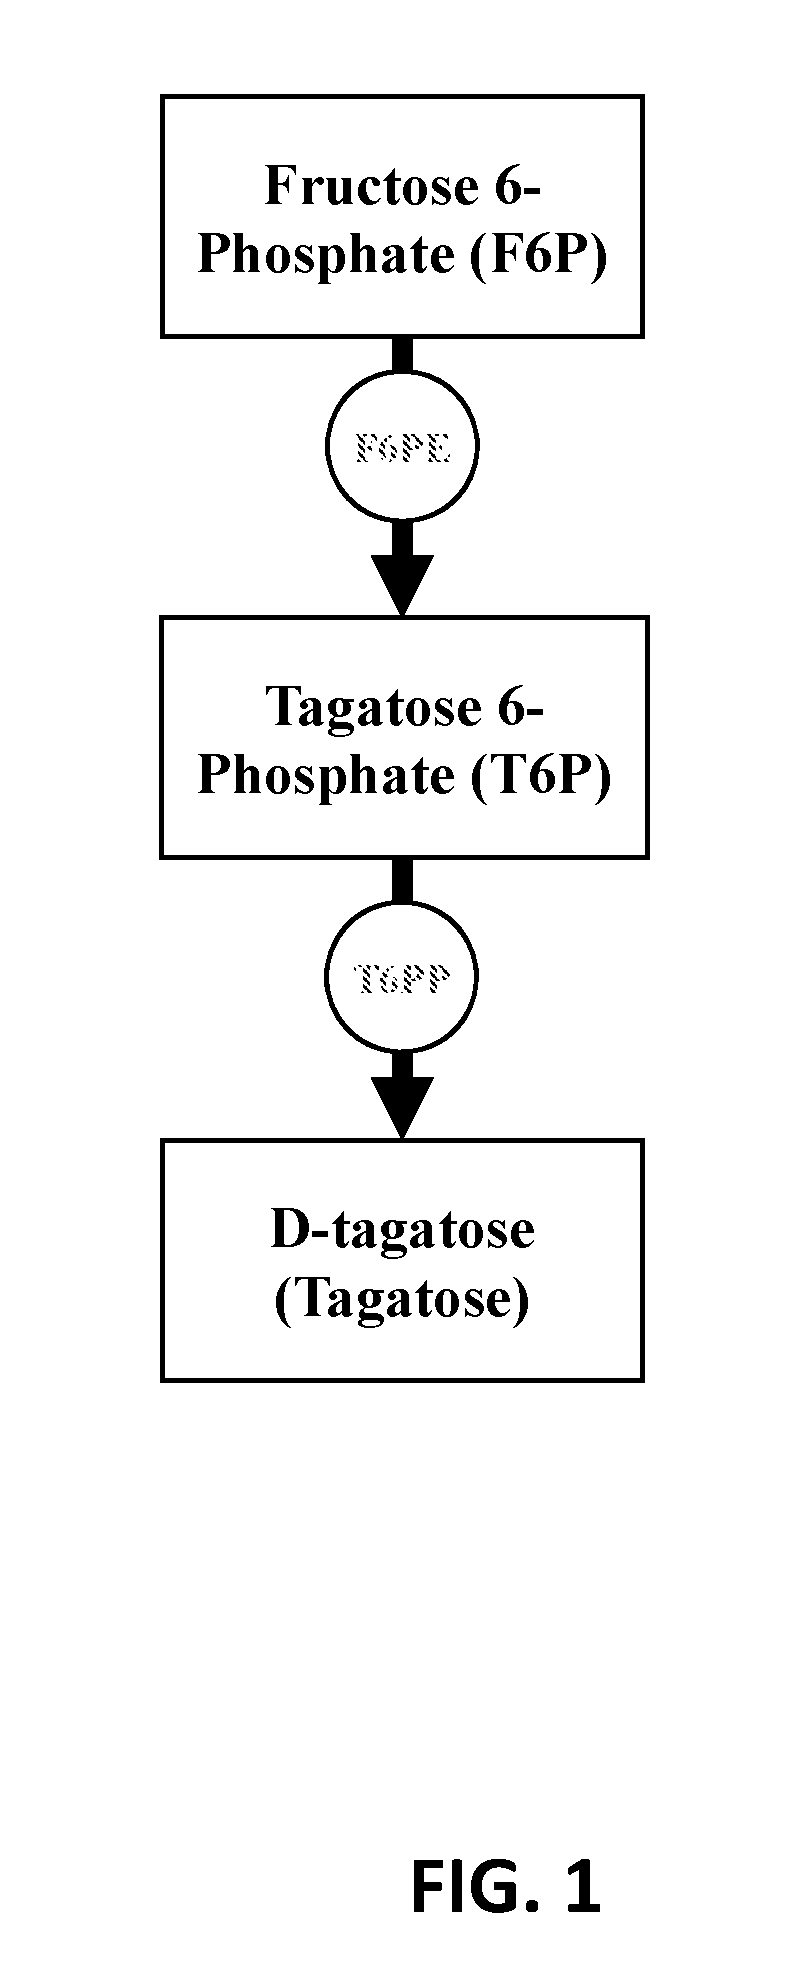 Enzymatic production of D-tagatose